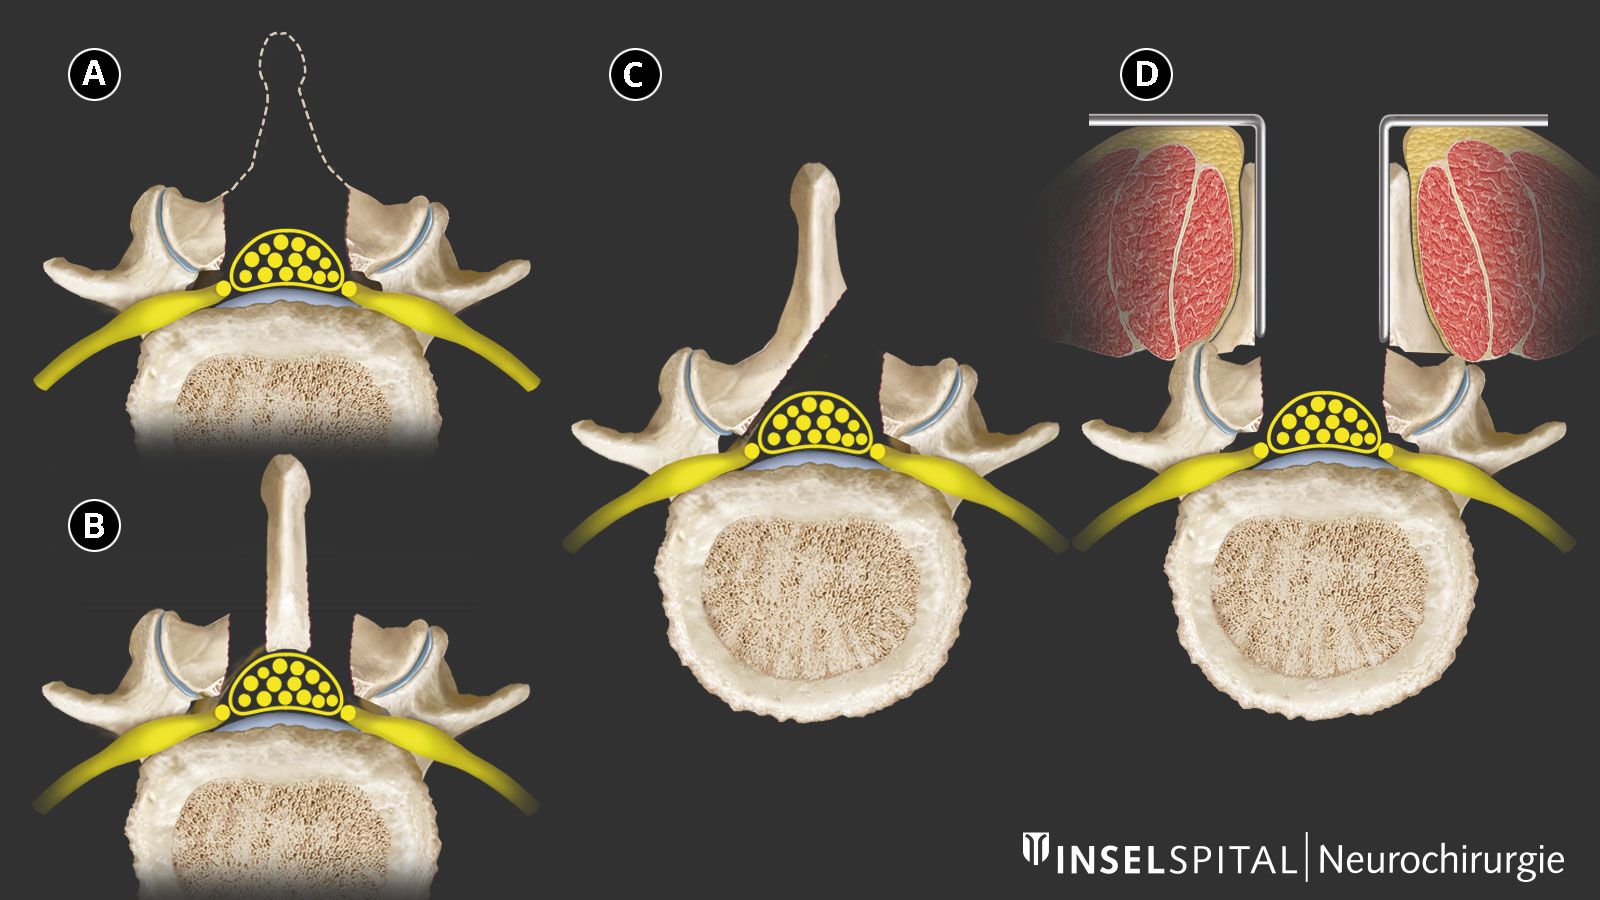 Overview drawing of possible surgical techniques and approaches in lumbar spinal stenosis.